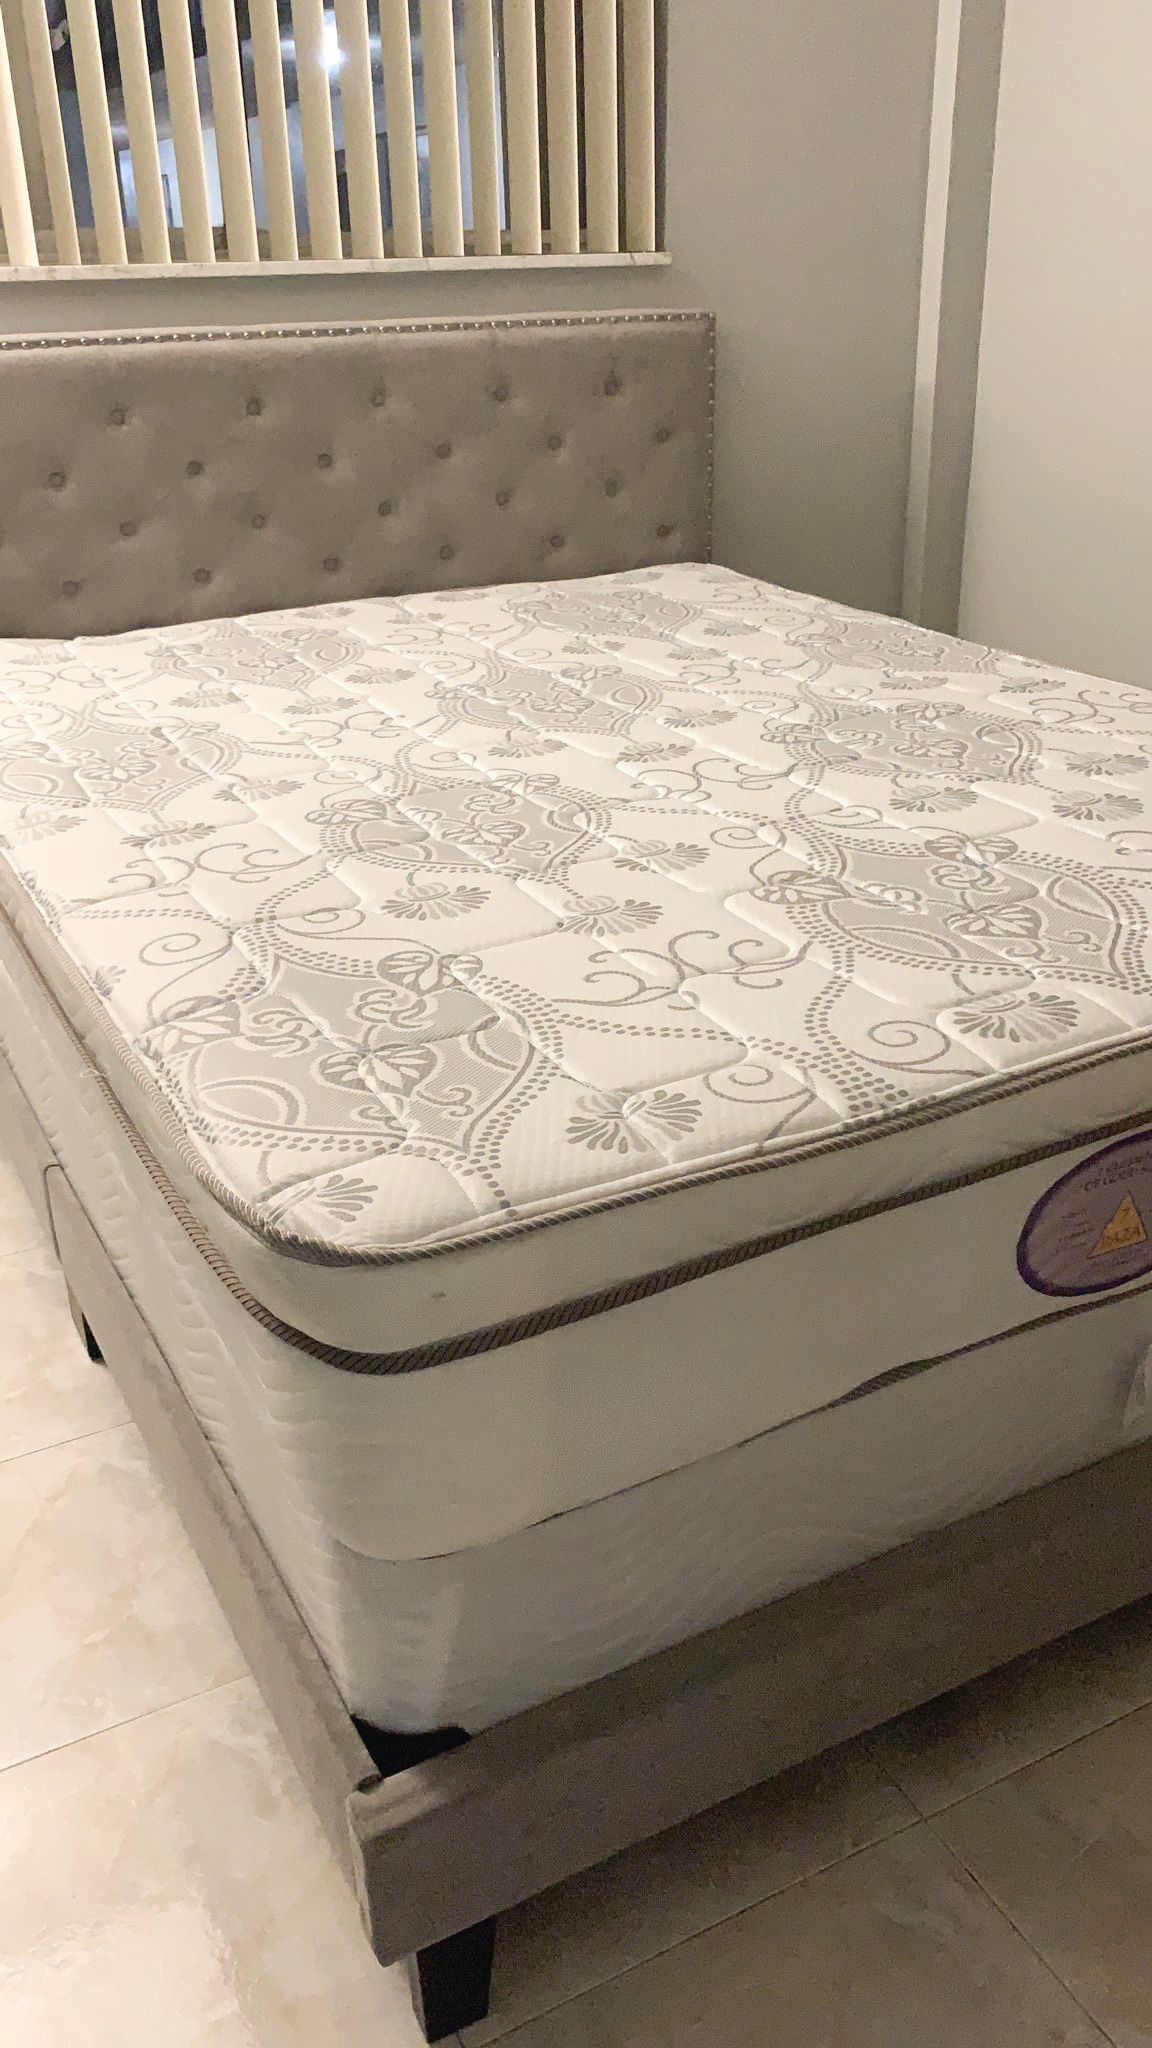 New Queen Mattress And Box Spring 2pc Bed Frame Is Nor Included 